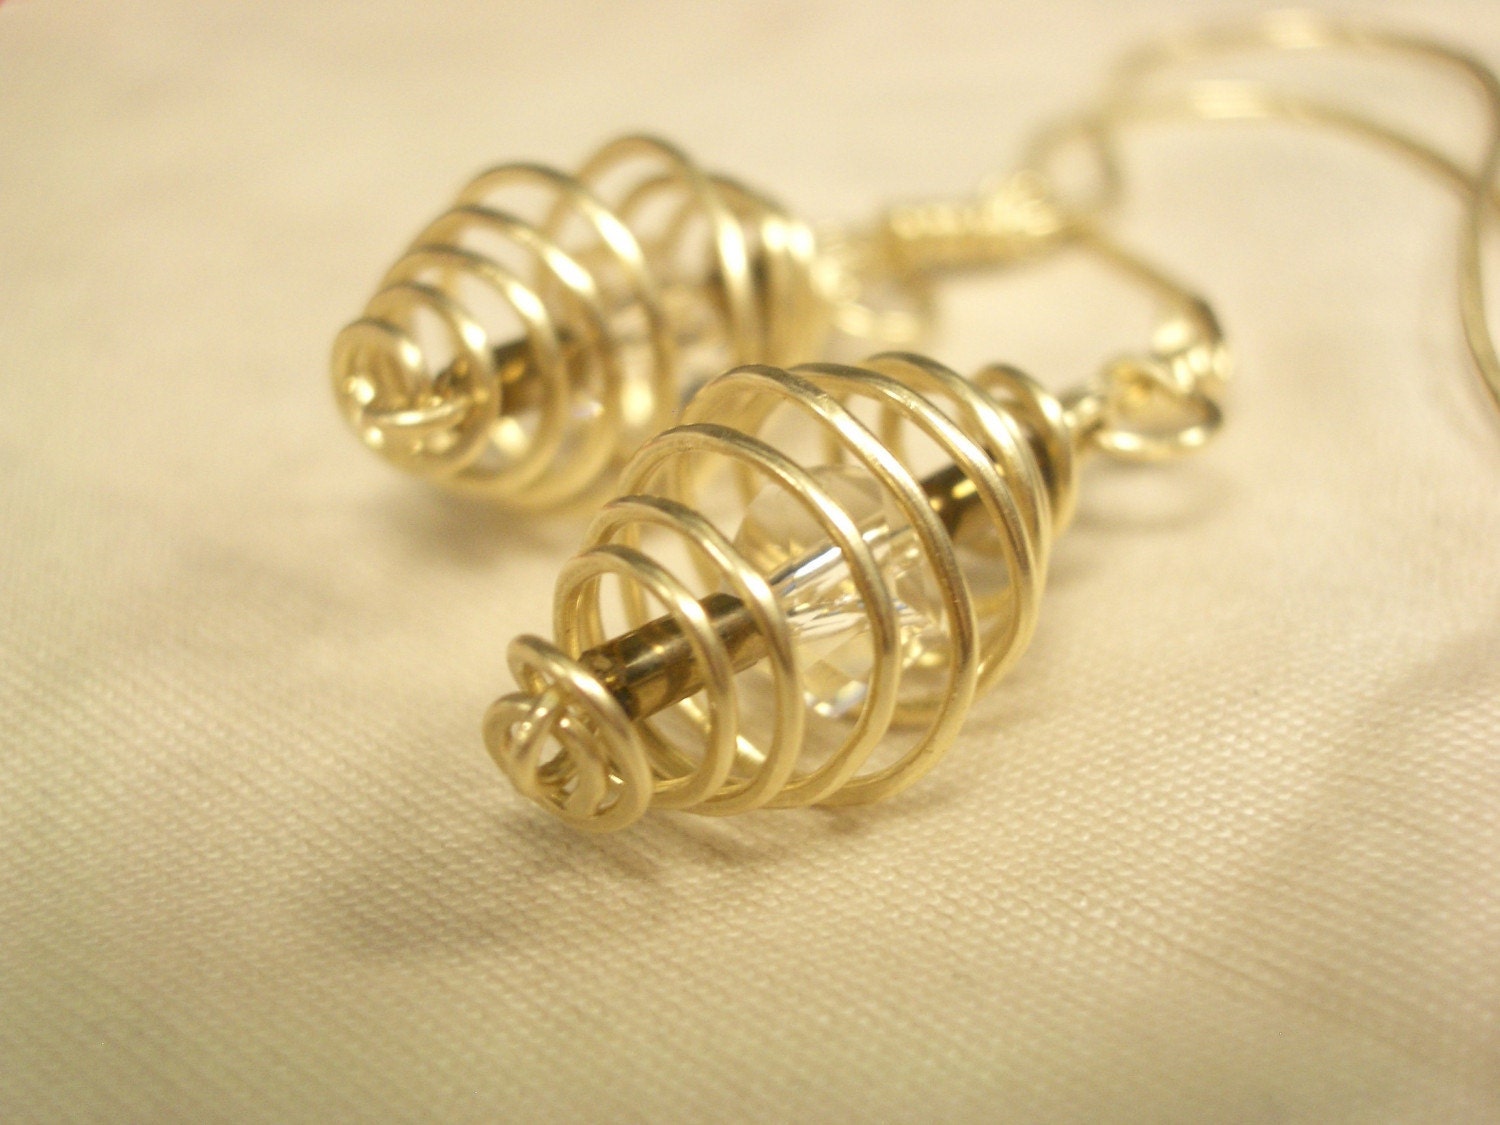 Gold Spiral Cage Earrings with Swarovski Crystal  -  FREE Shipping